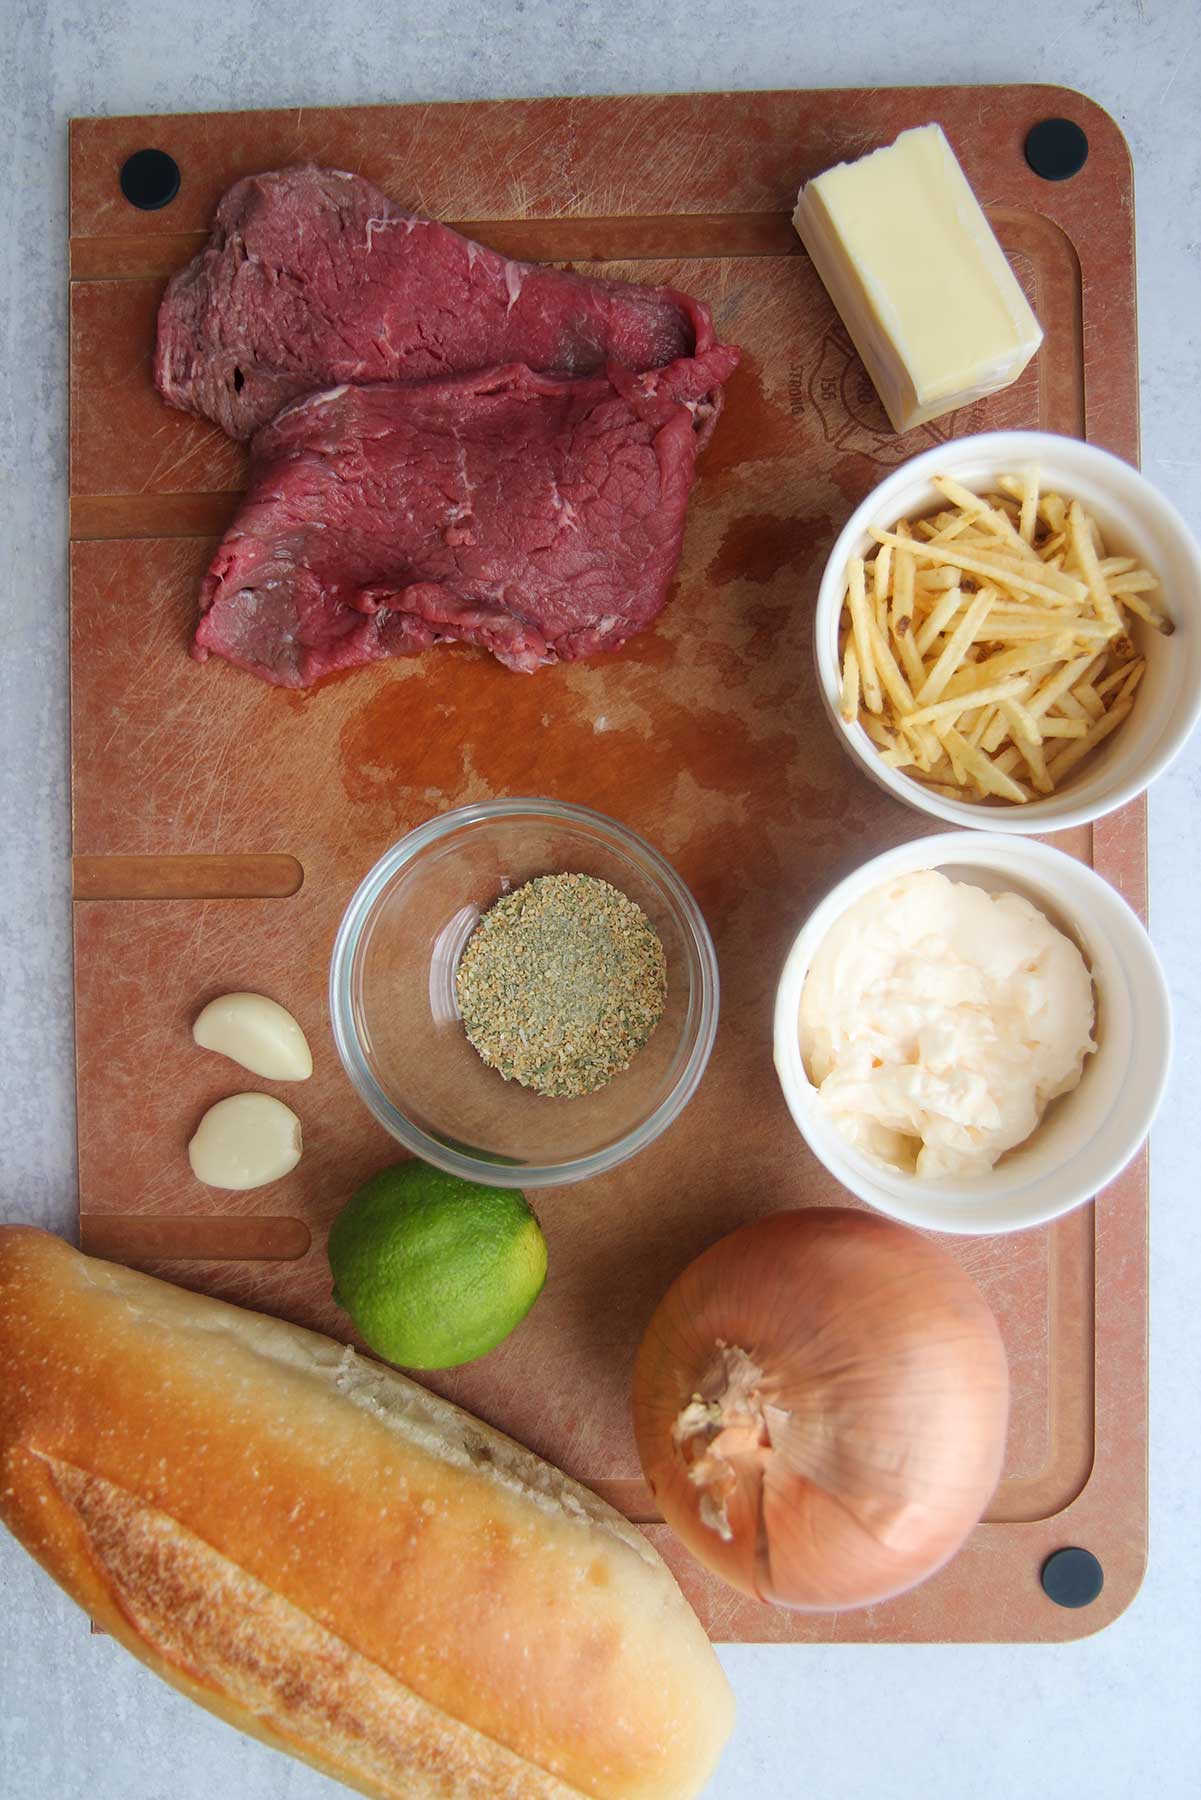 ingredients for pan con bistec. Spices in a small bowl, mayo in a bowl, steaks, lime, garlic, onion, butter, and potato straws. 